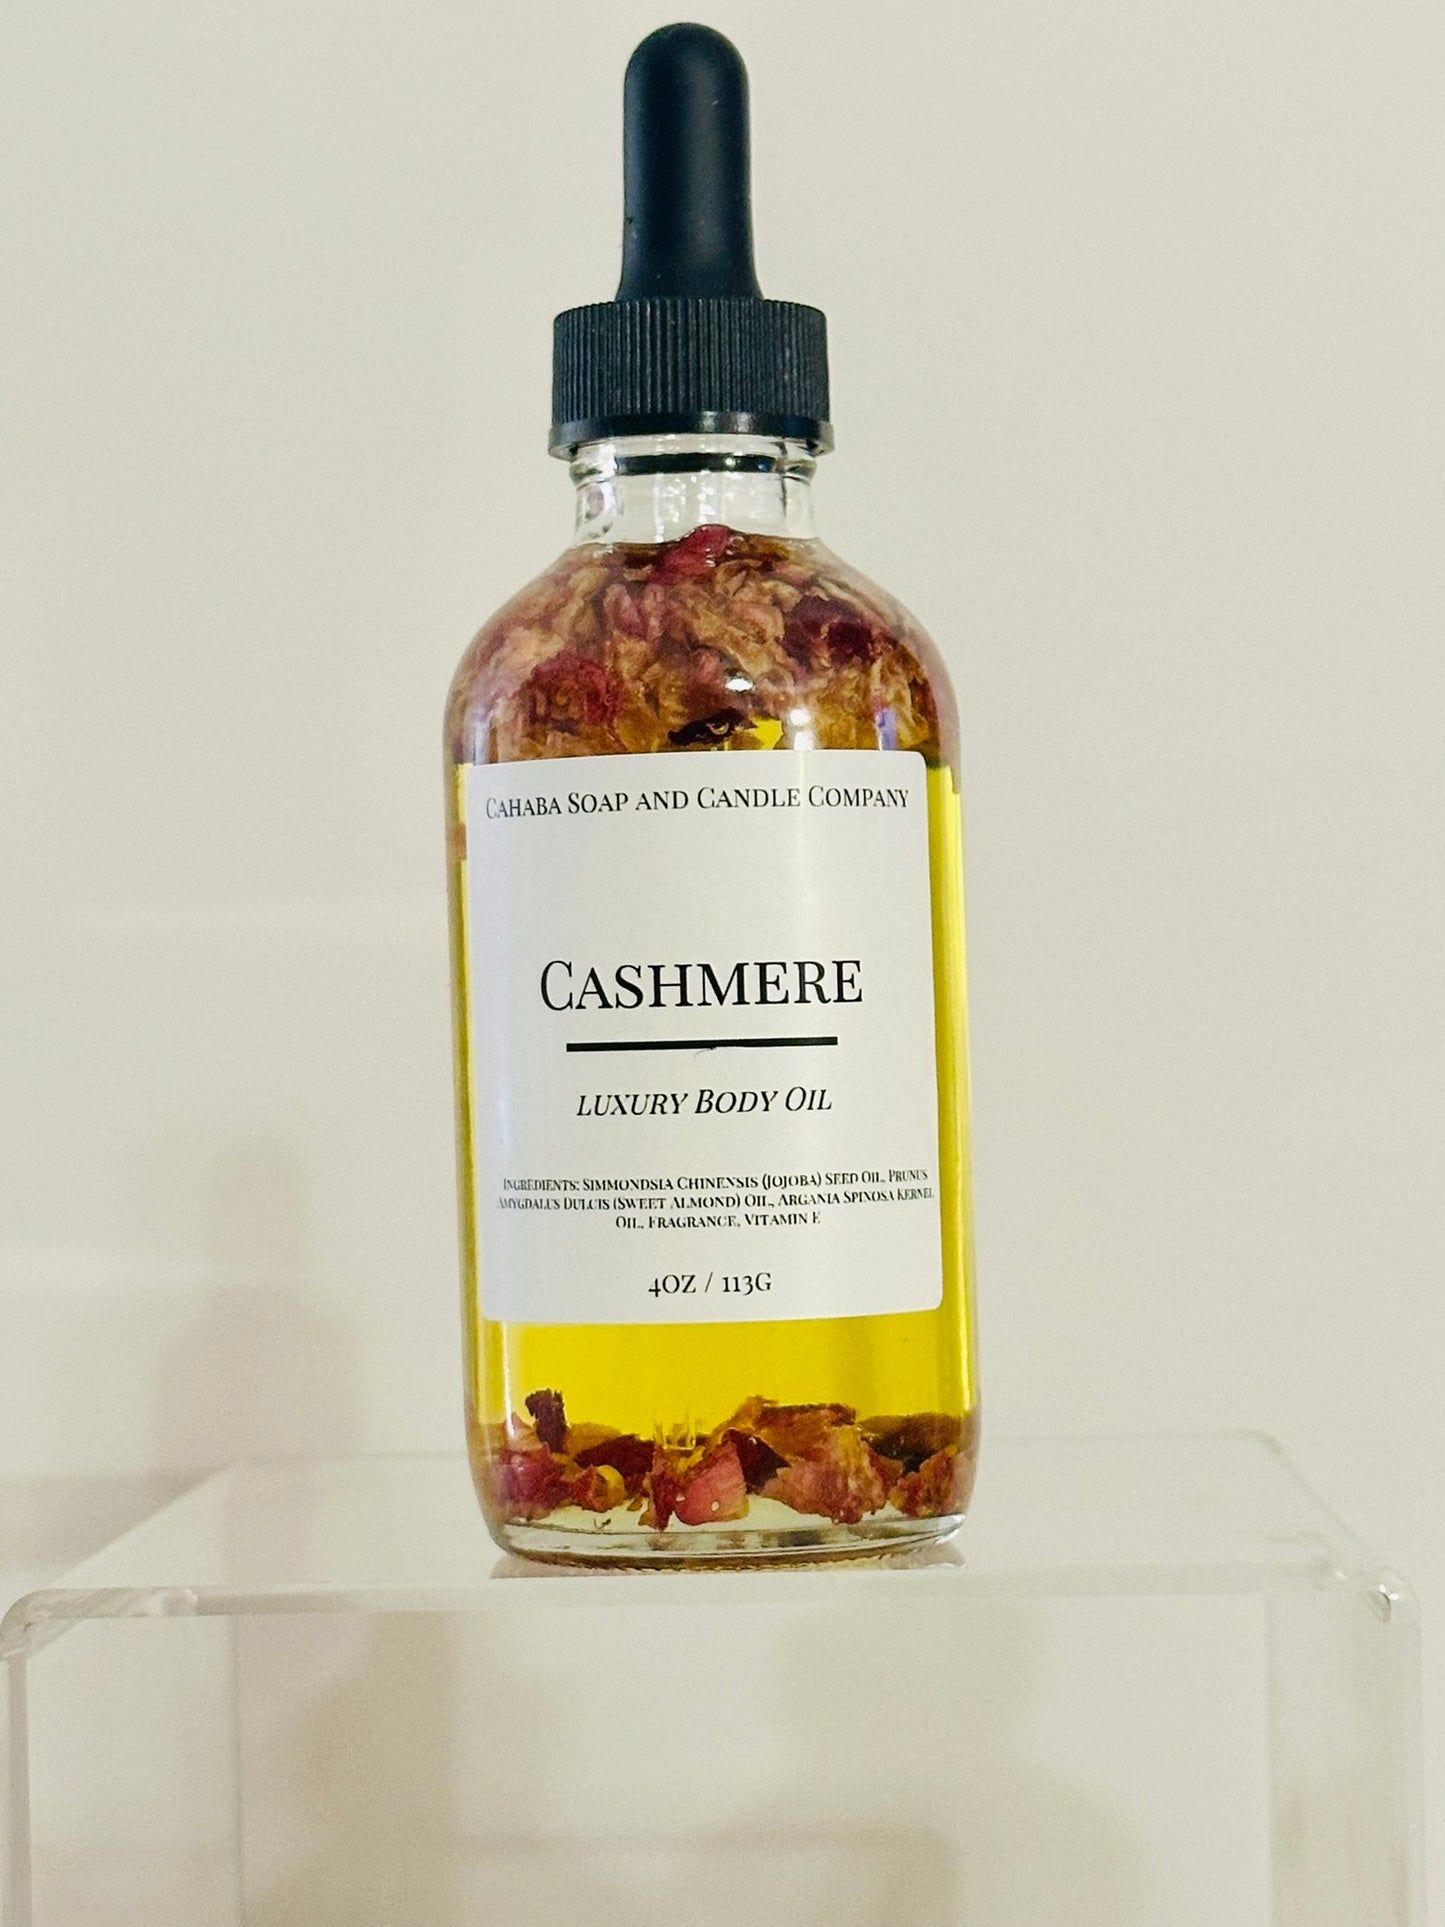 Cashmere Body Oil - Cahaba Soap and Candle Company